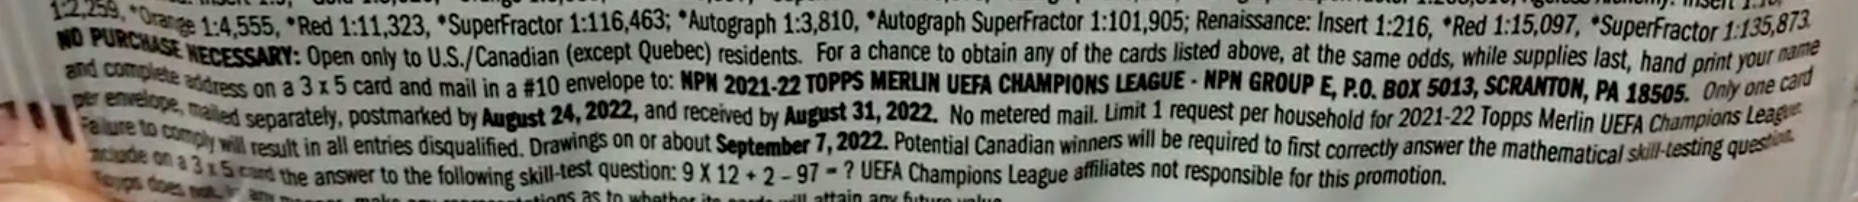 2021-22 Topps Merlin Chrome UEFA League Soccer Cards - Hobby Box - No Purchase Necessary (NPN) Information